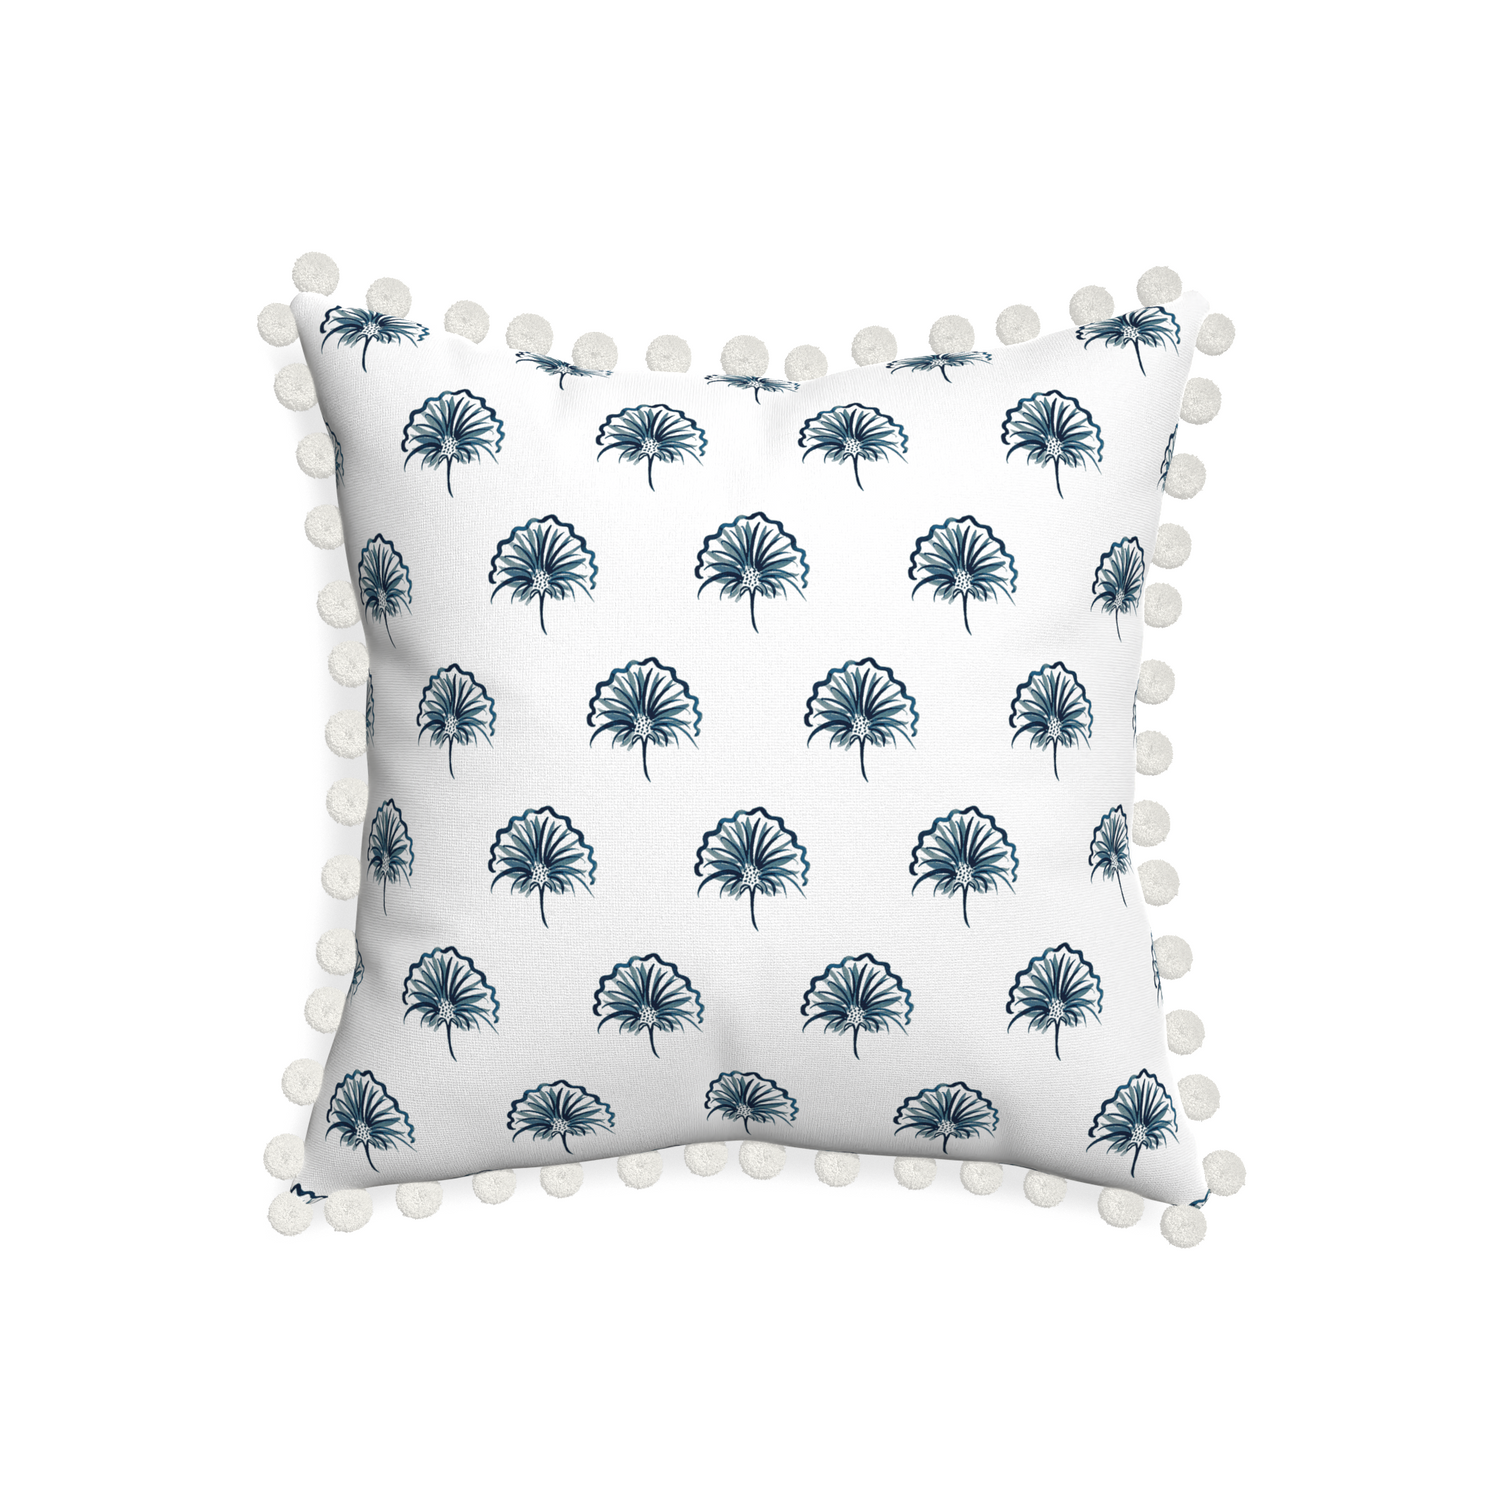 20-square penelope midnight custom floral navypillow with snow pom pom on white background